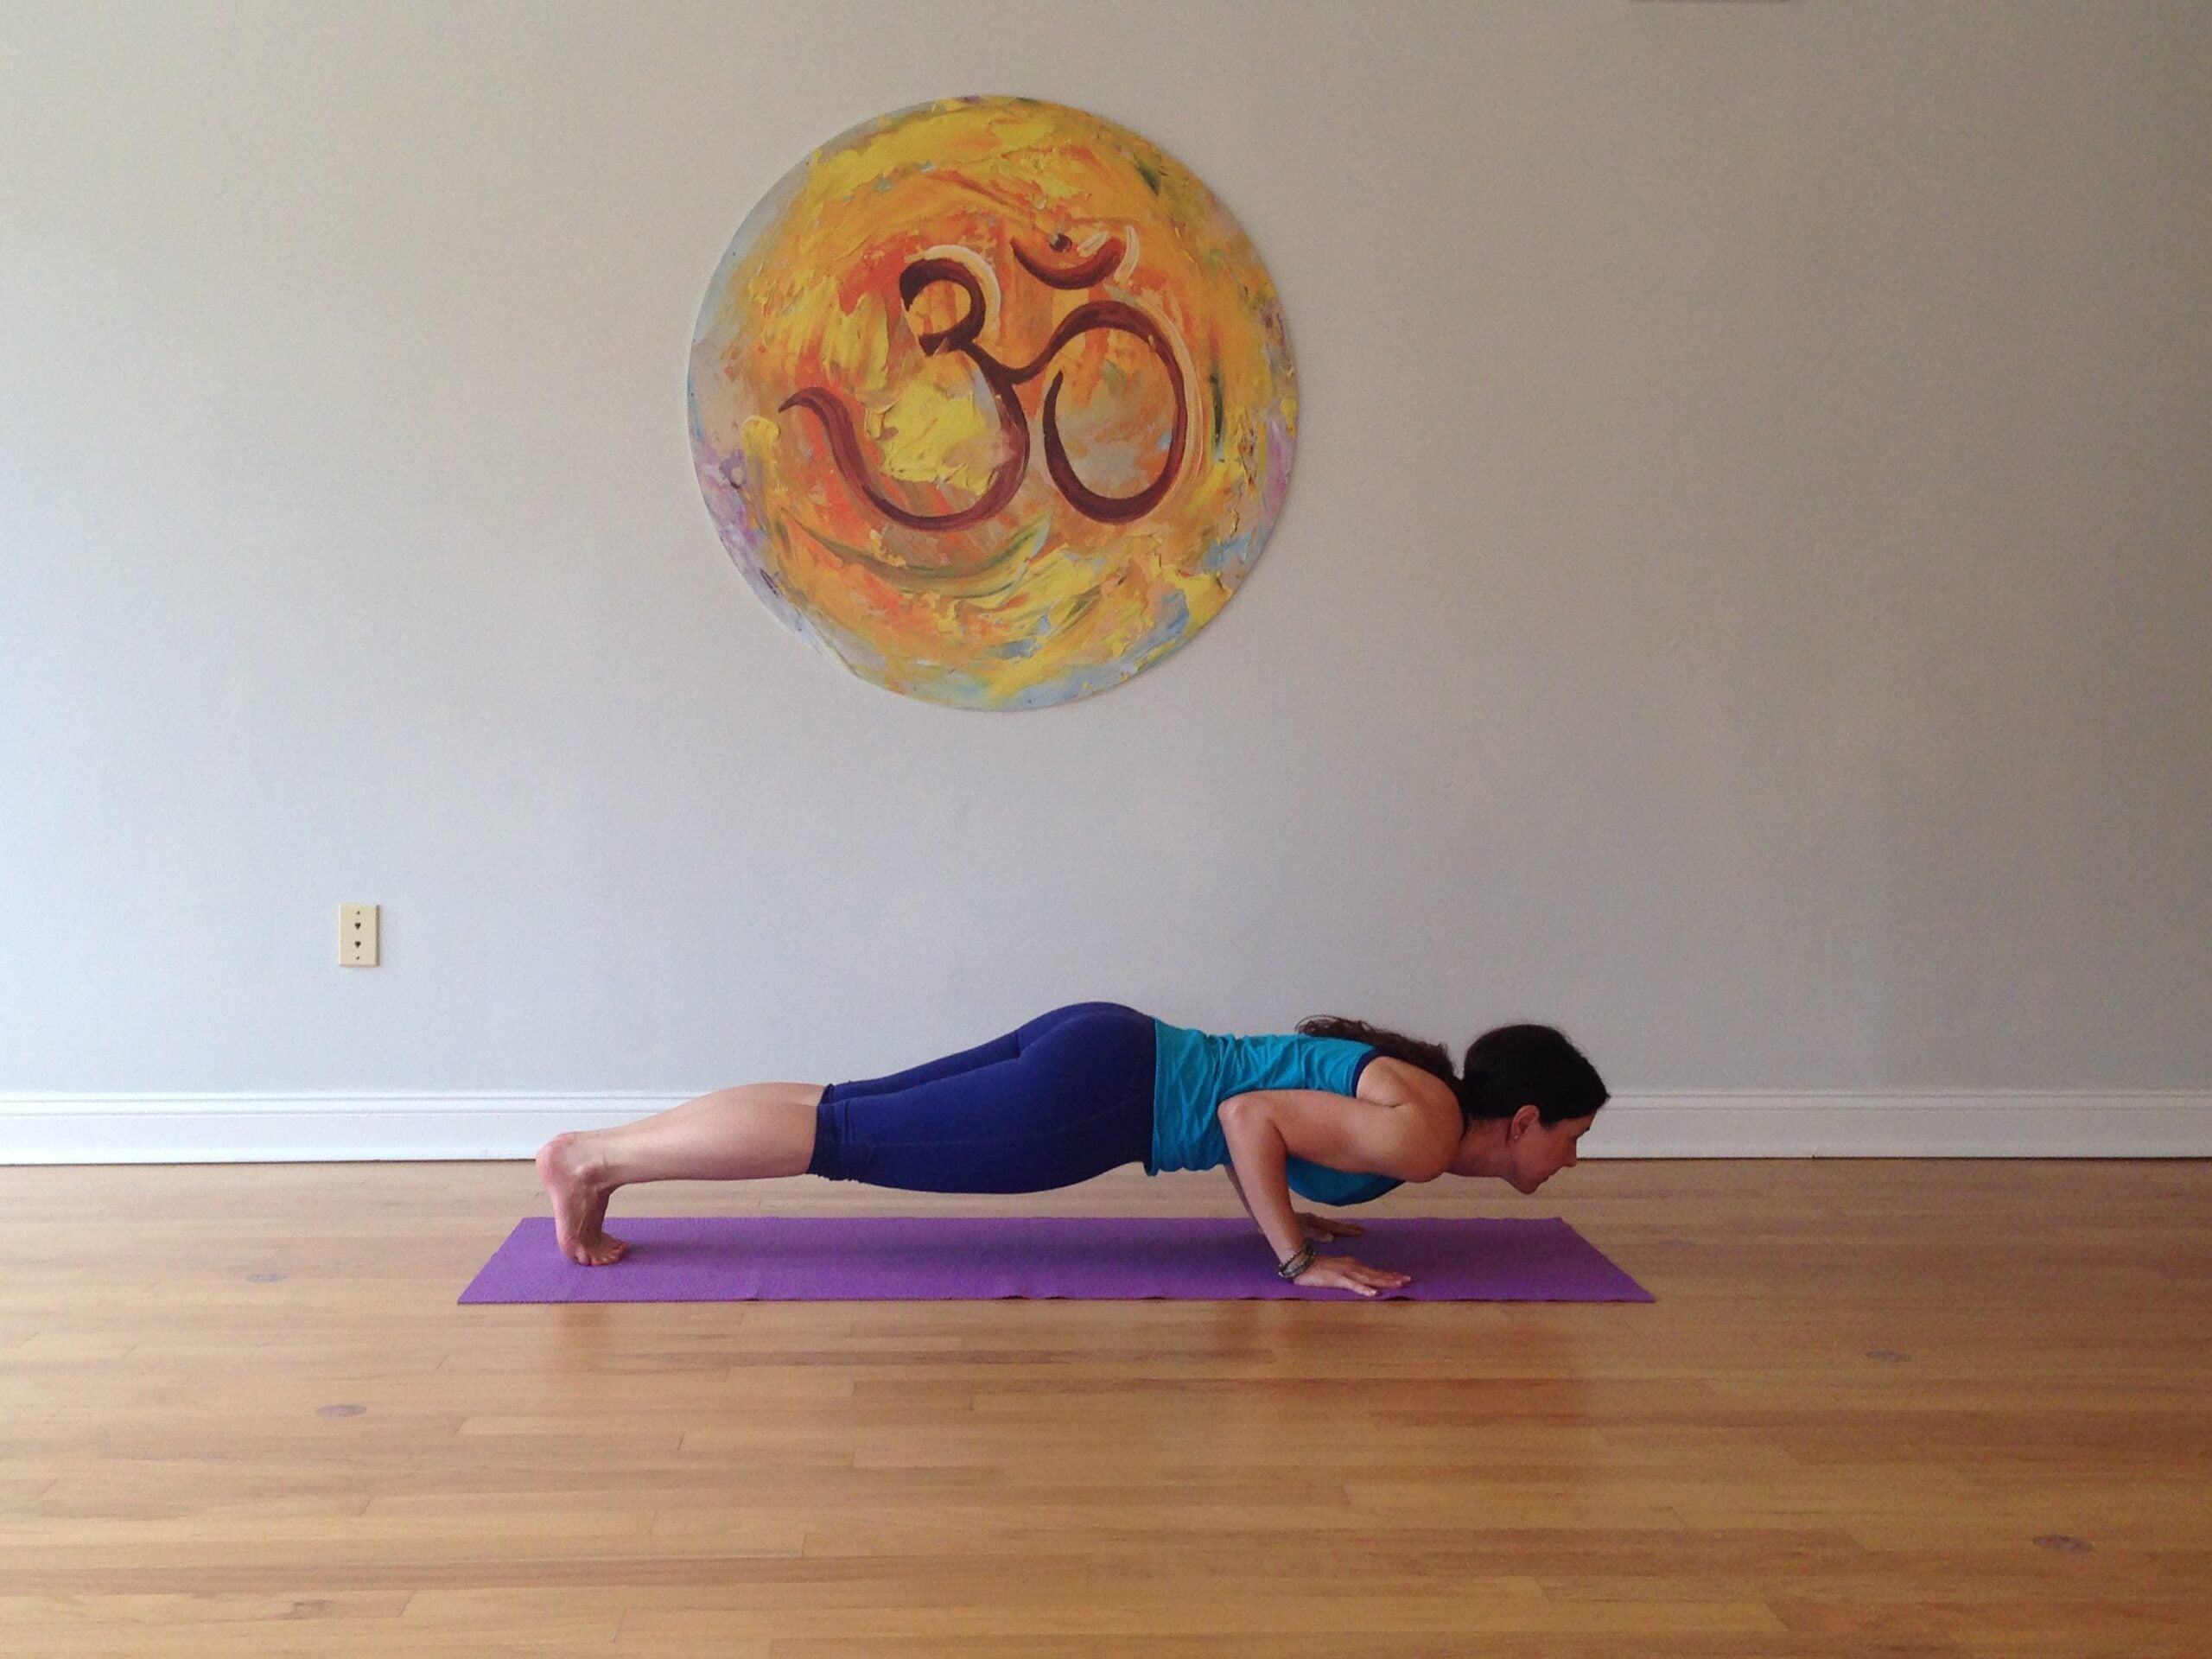 How Long Should You Hold A Yoga Pose For The Best Results? - Fitsri Yoga